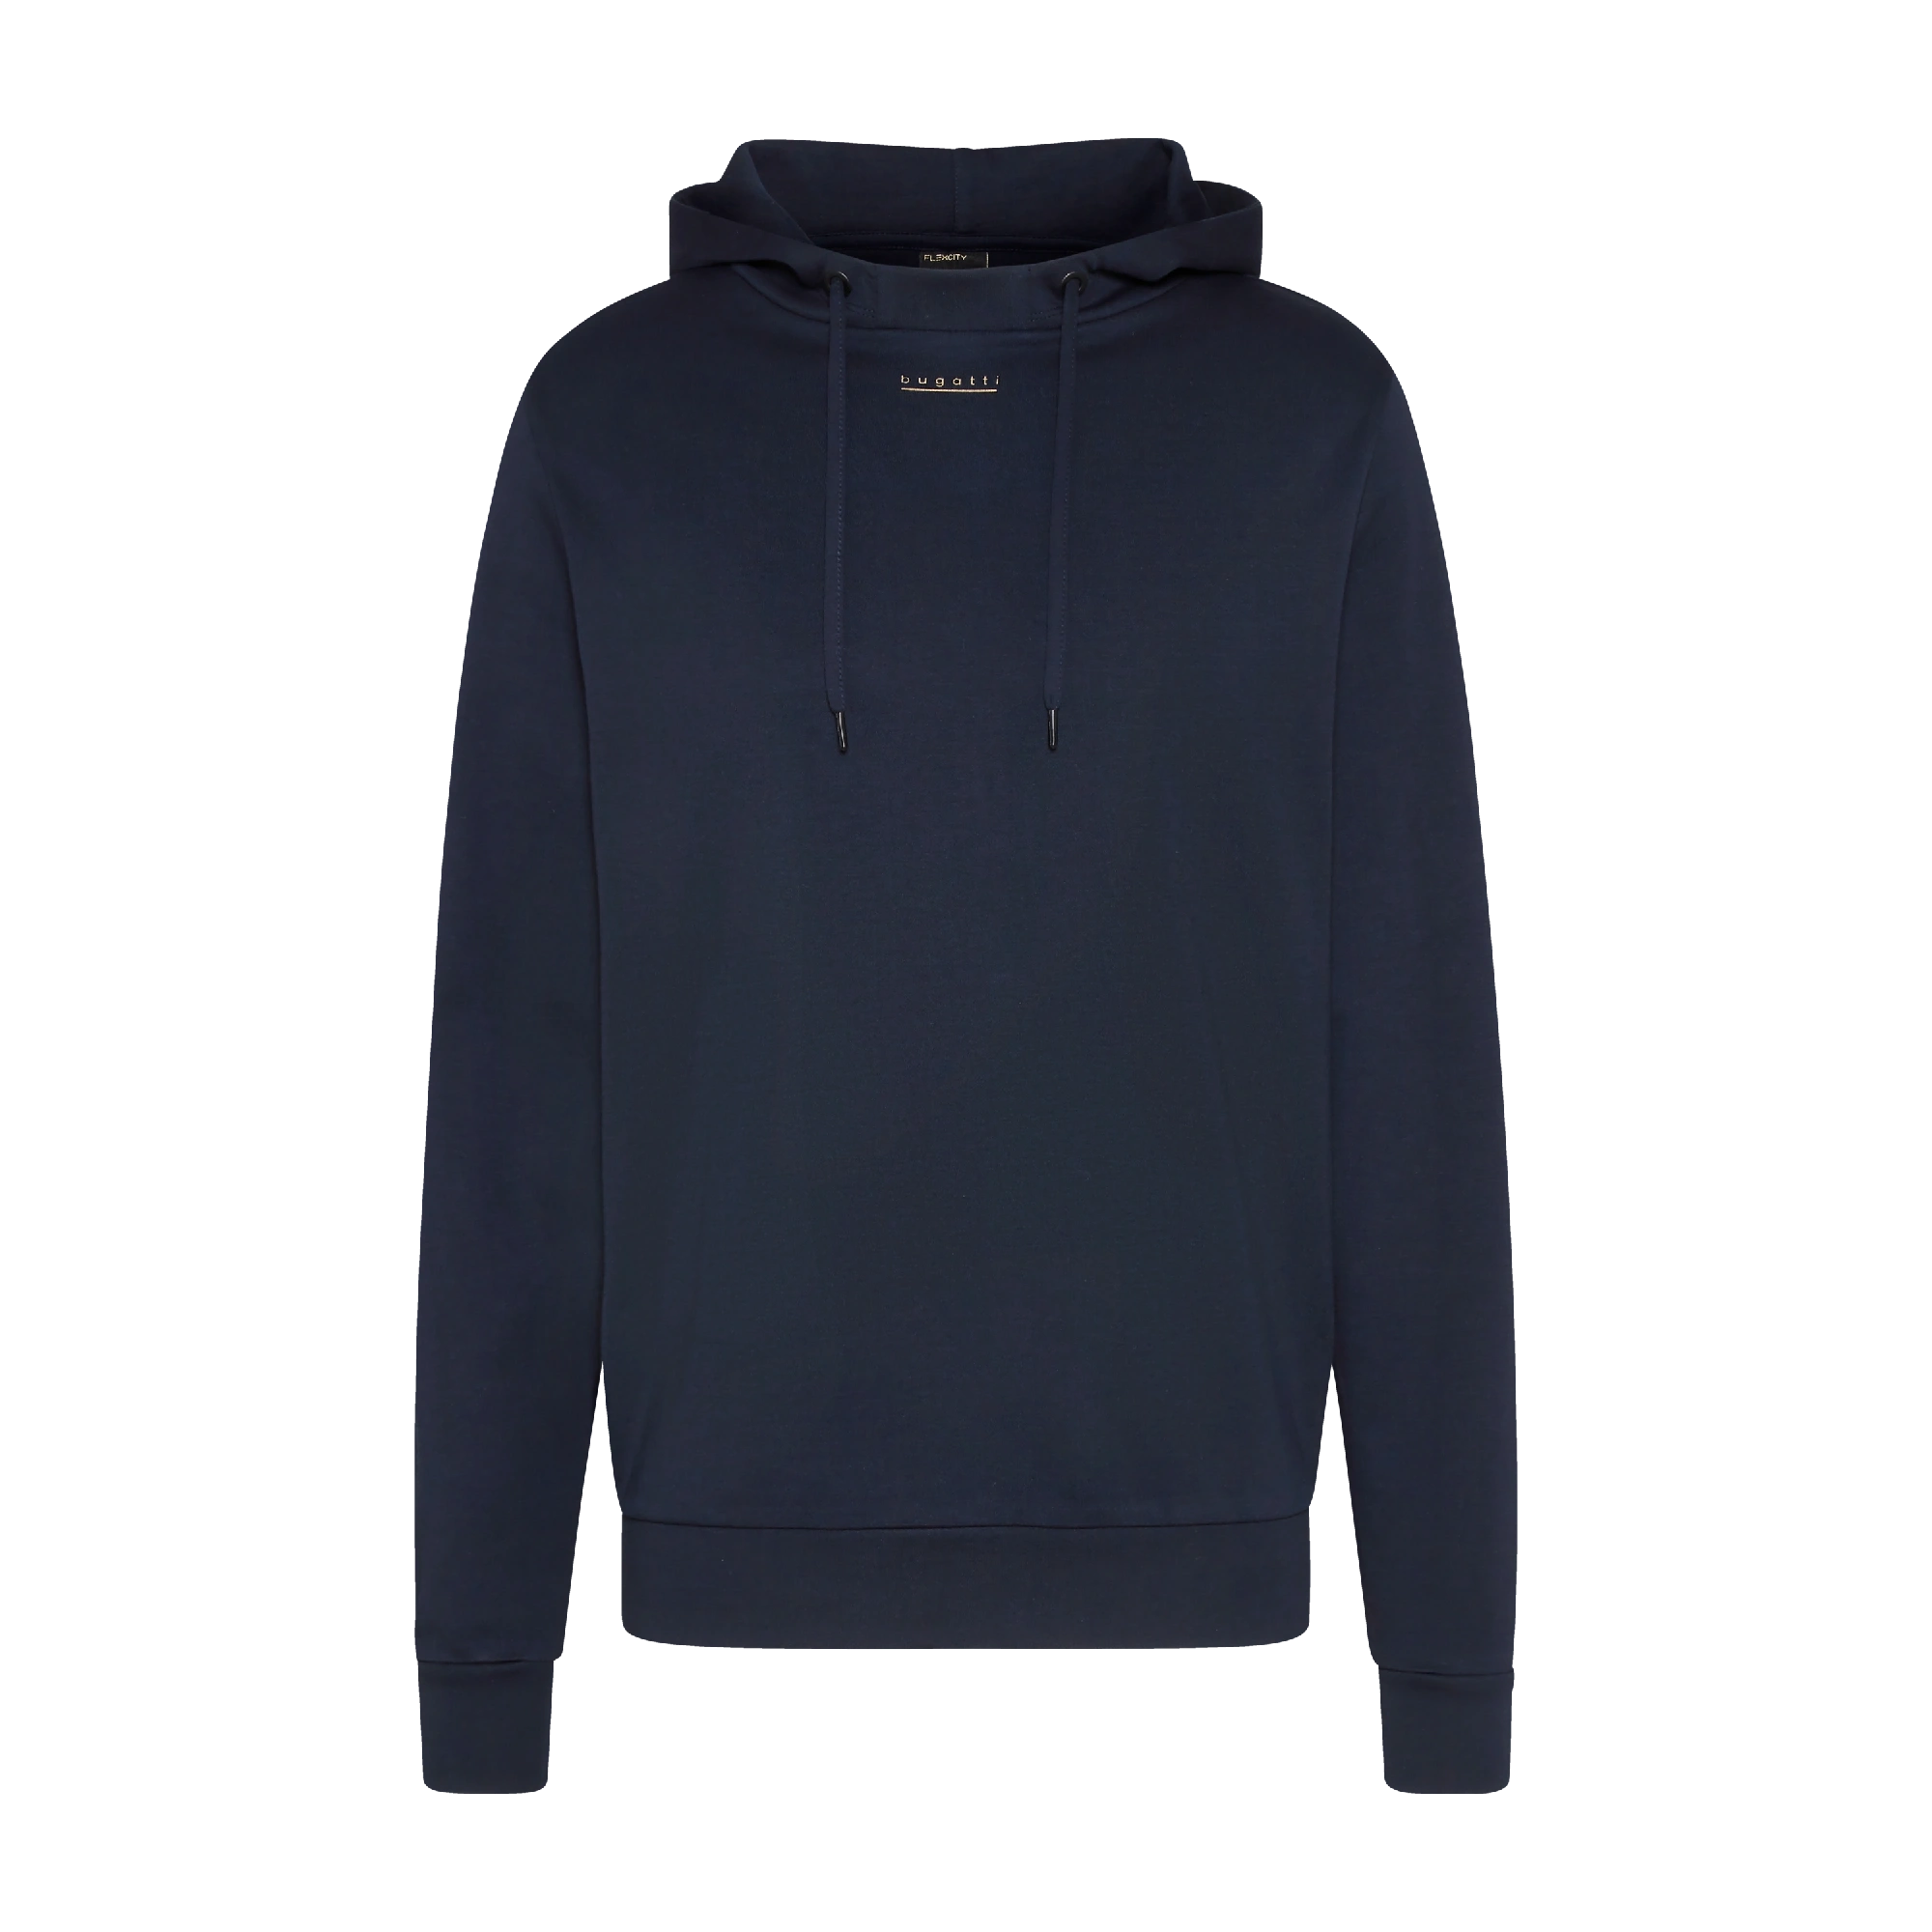 Hooded sweatshirt print bugatti in With | logo in gold small navy